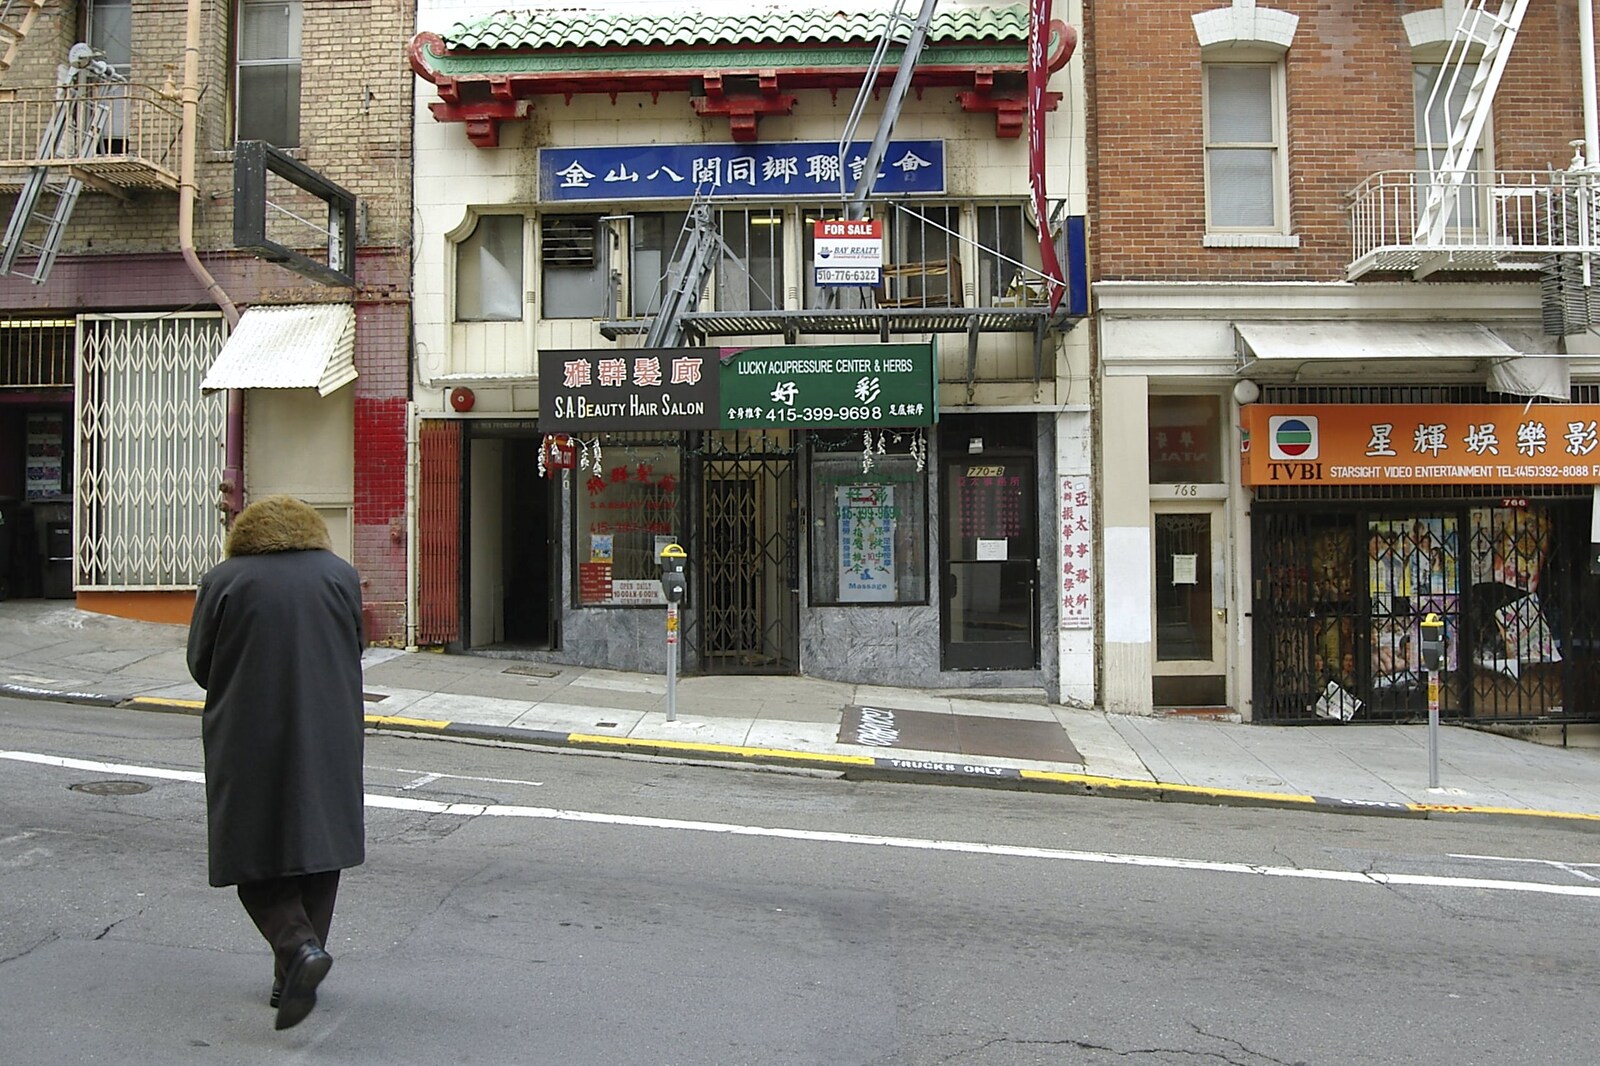 A woman crosses the road from Chinatown, Telegraph Hill and Fisherman's Wharf, San Francisco, California, US - 11th March 2006